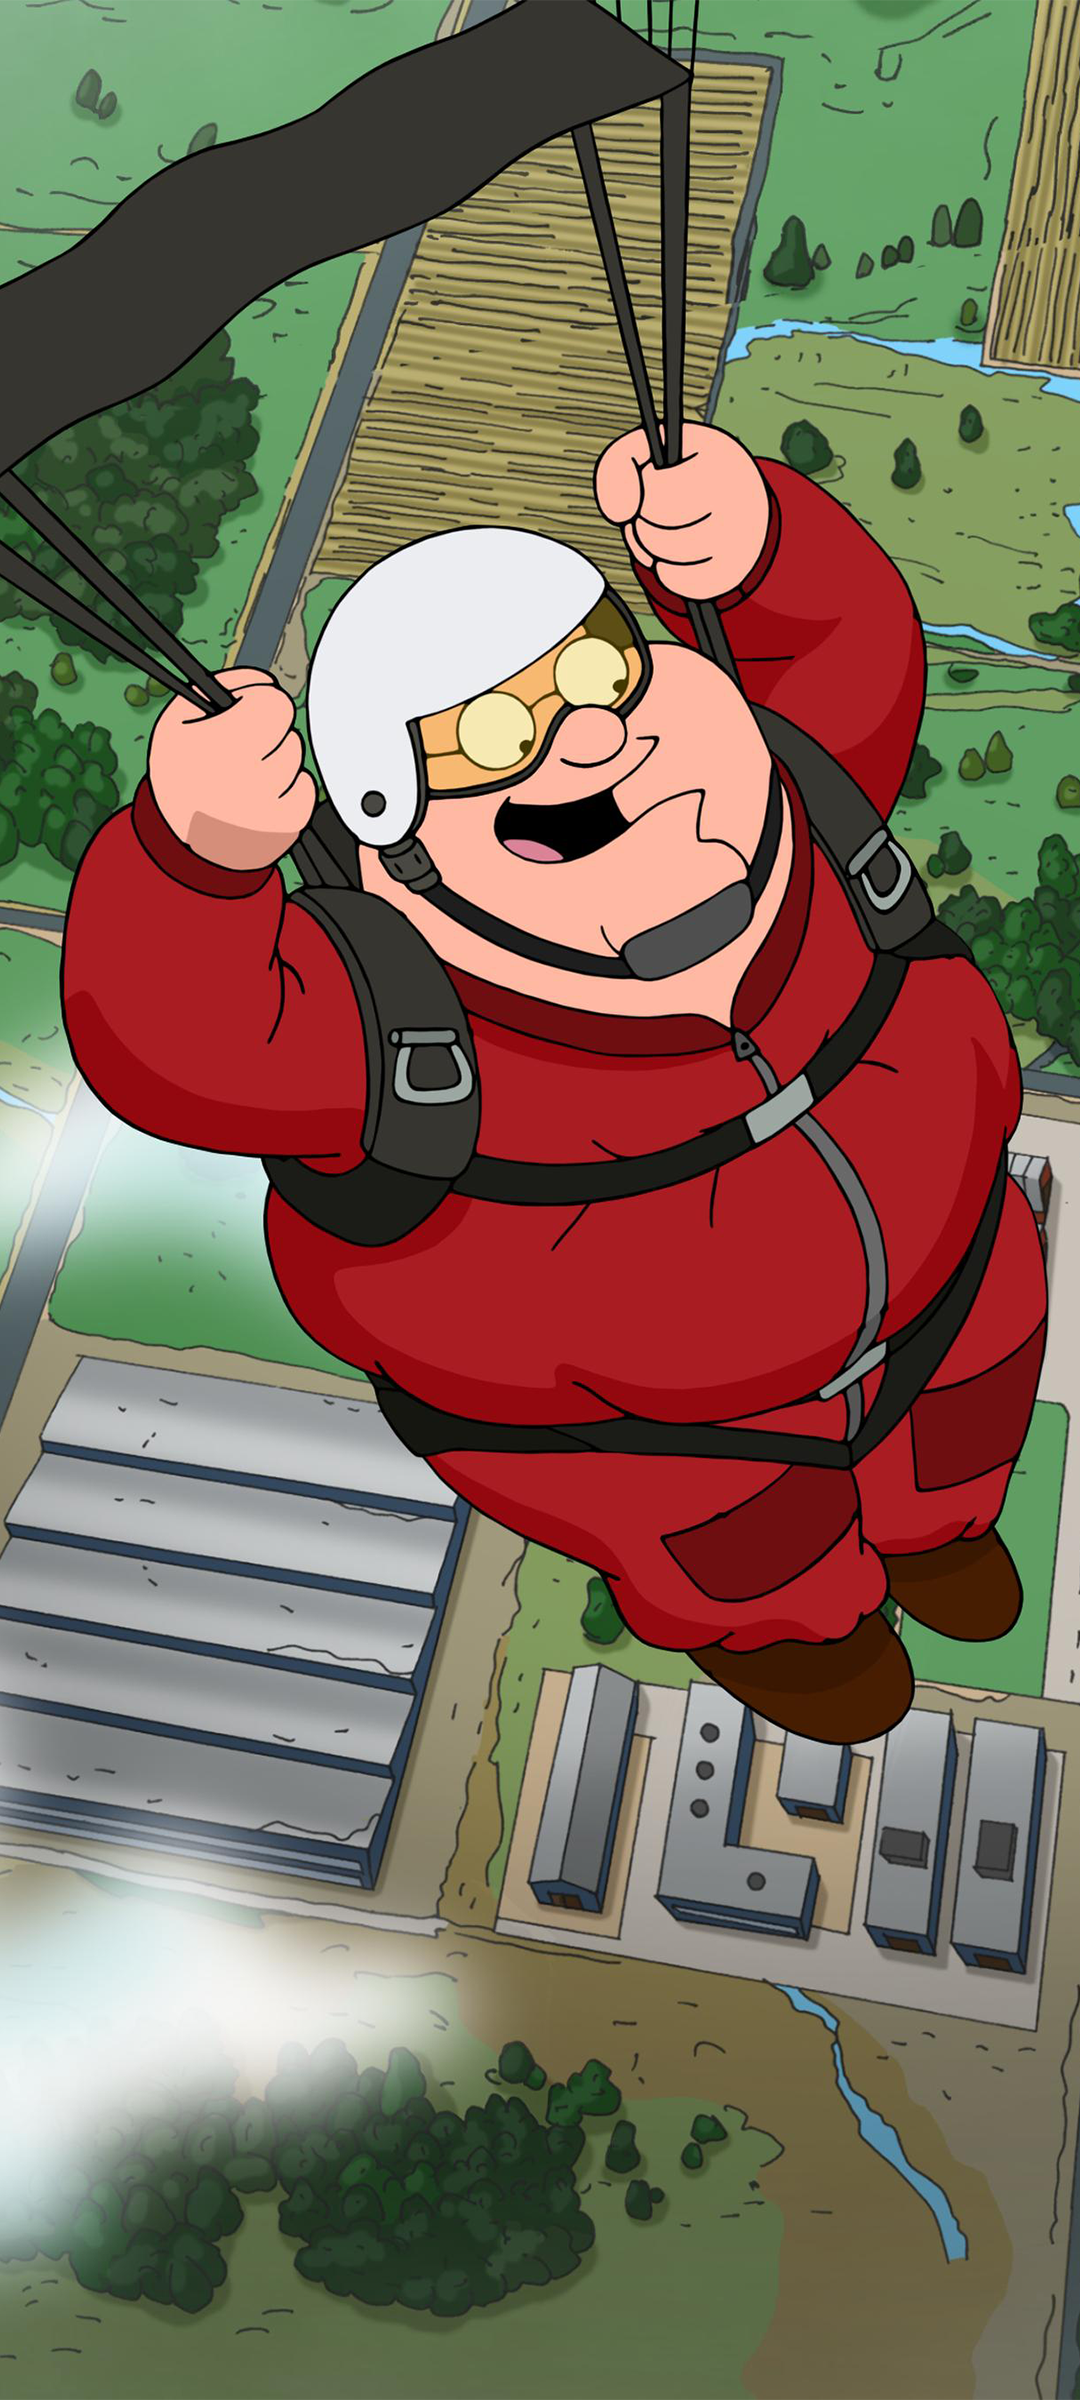 Wallpaper / TV Show Family Guy Phone Wallpaper, Peter Griffin, 1080x2400 free download